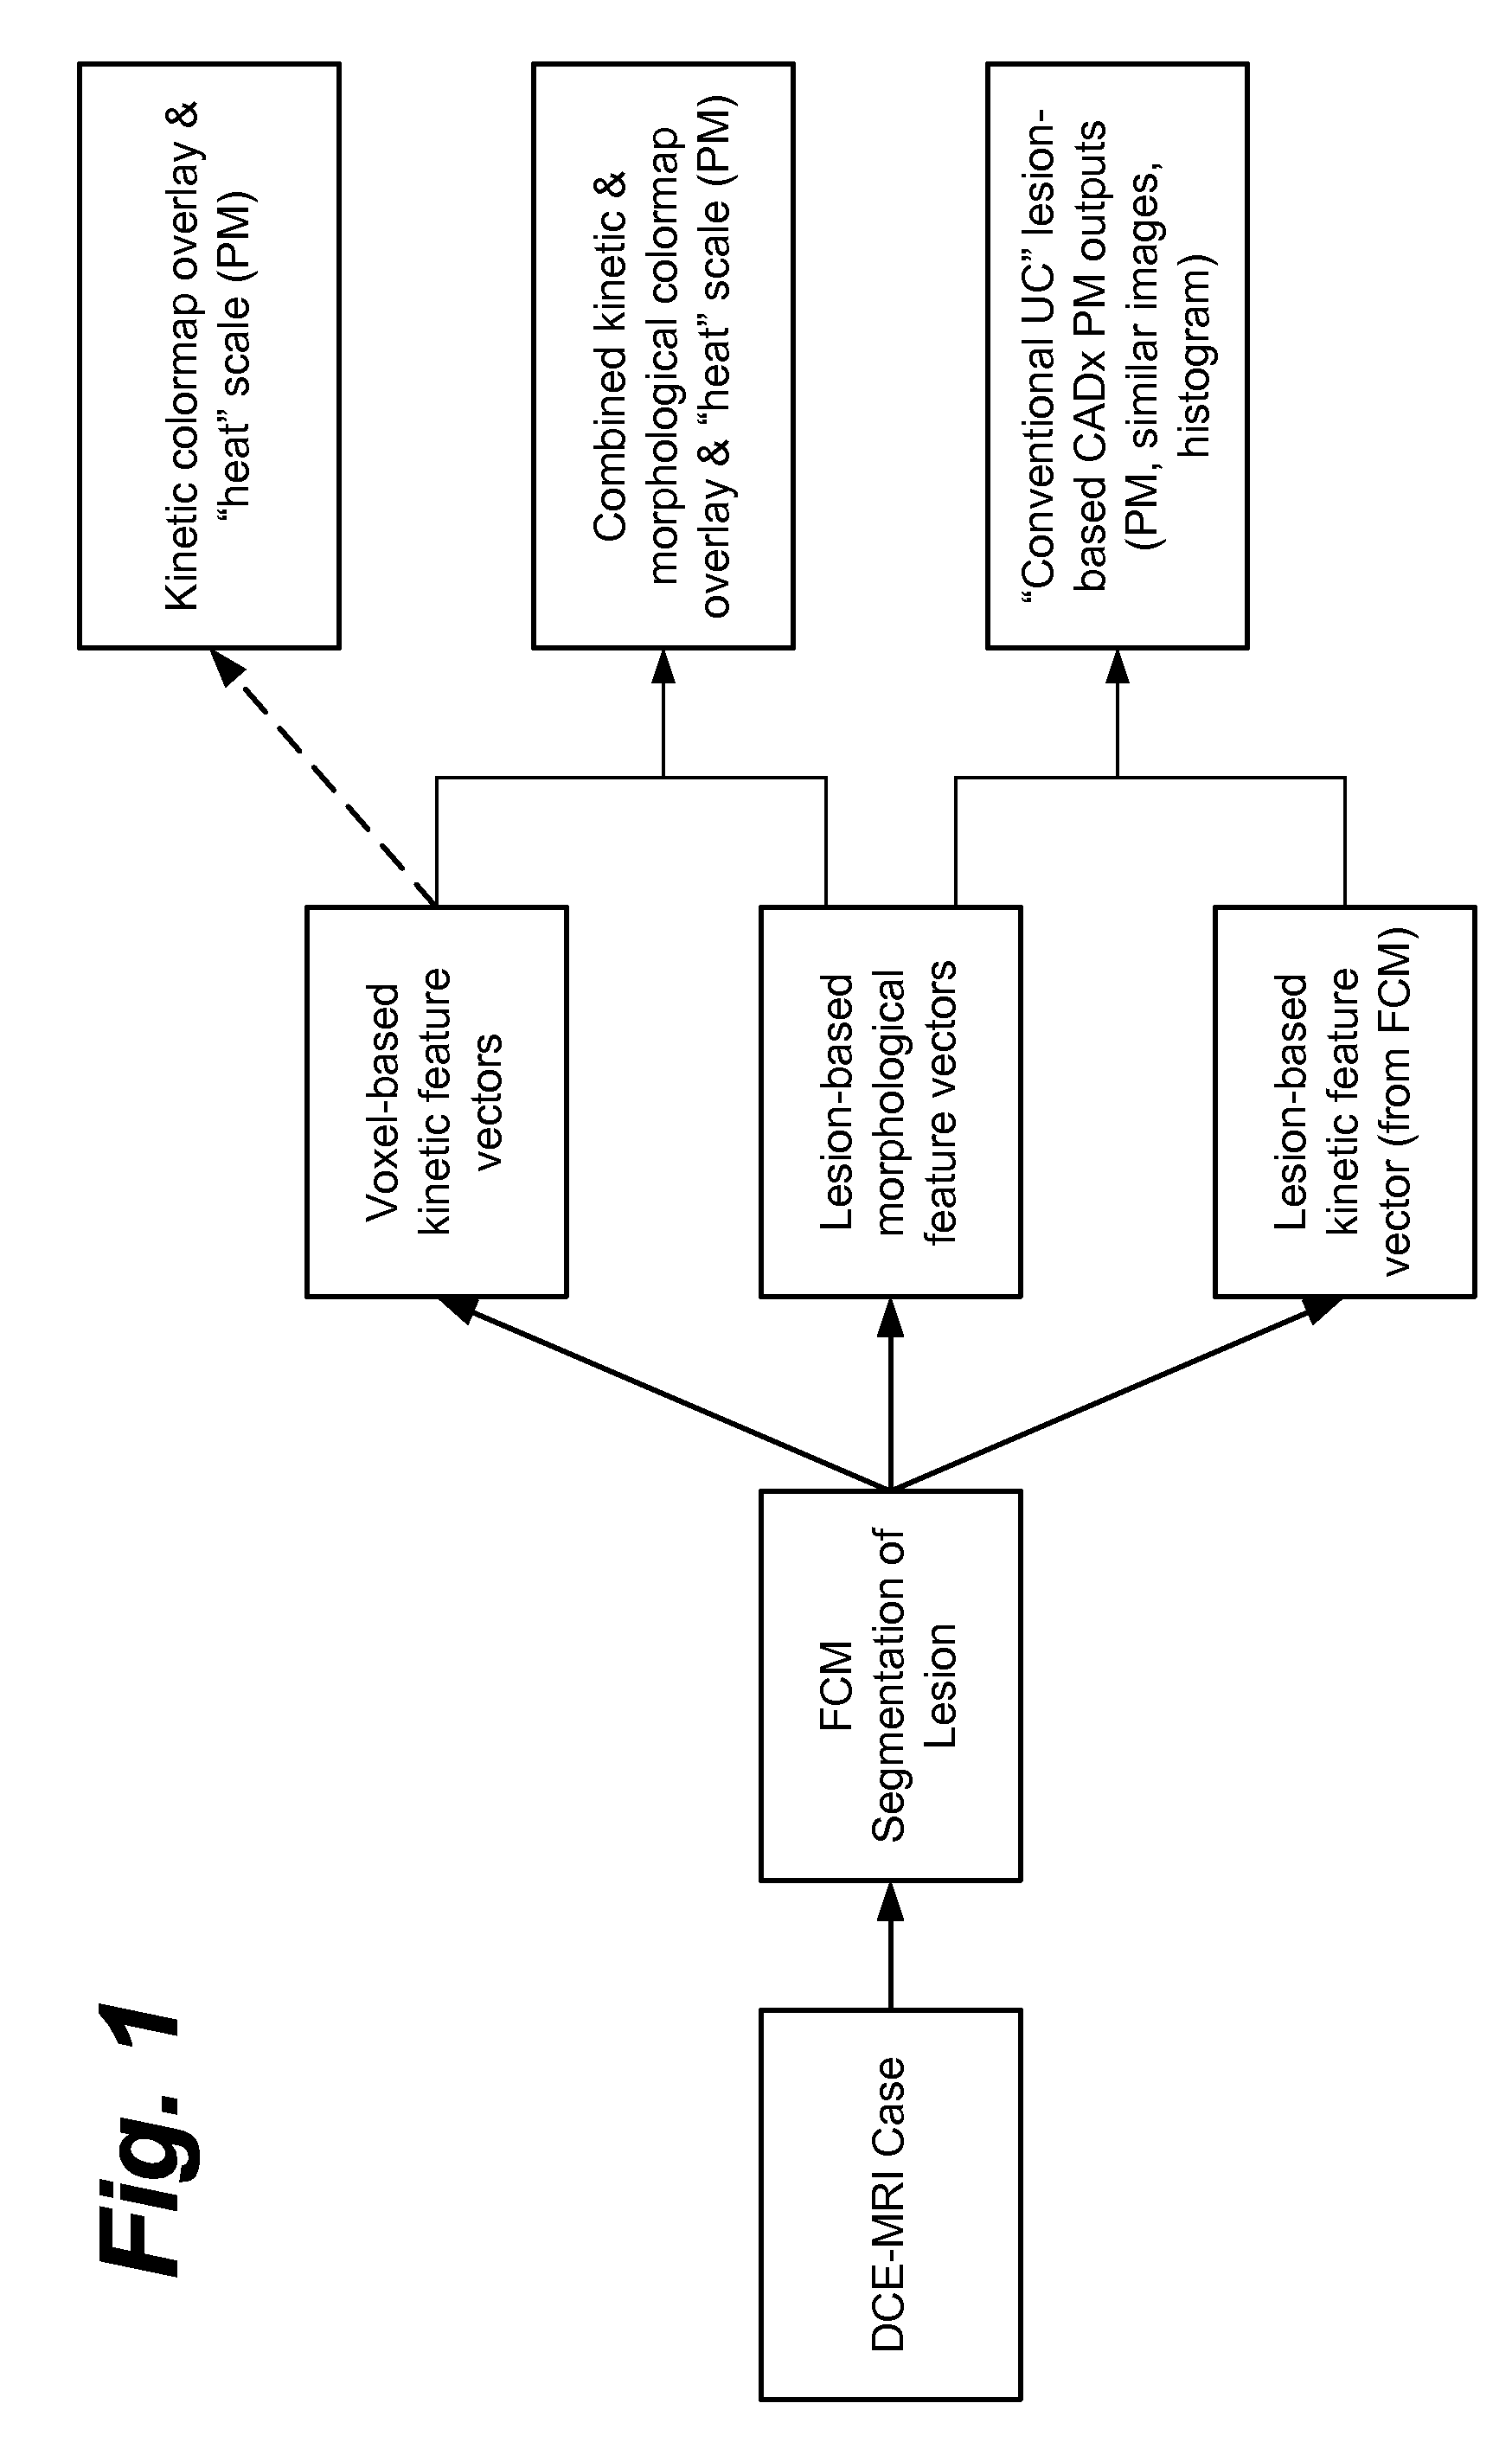 Method, system, software and medium for advanced intelligent image analysis and display of medical images and information